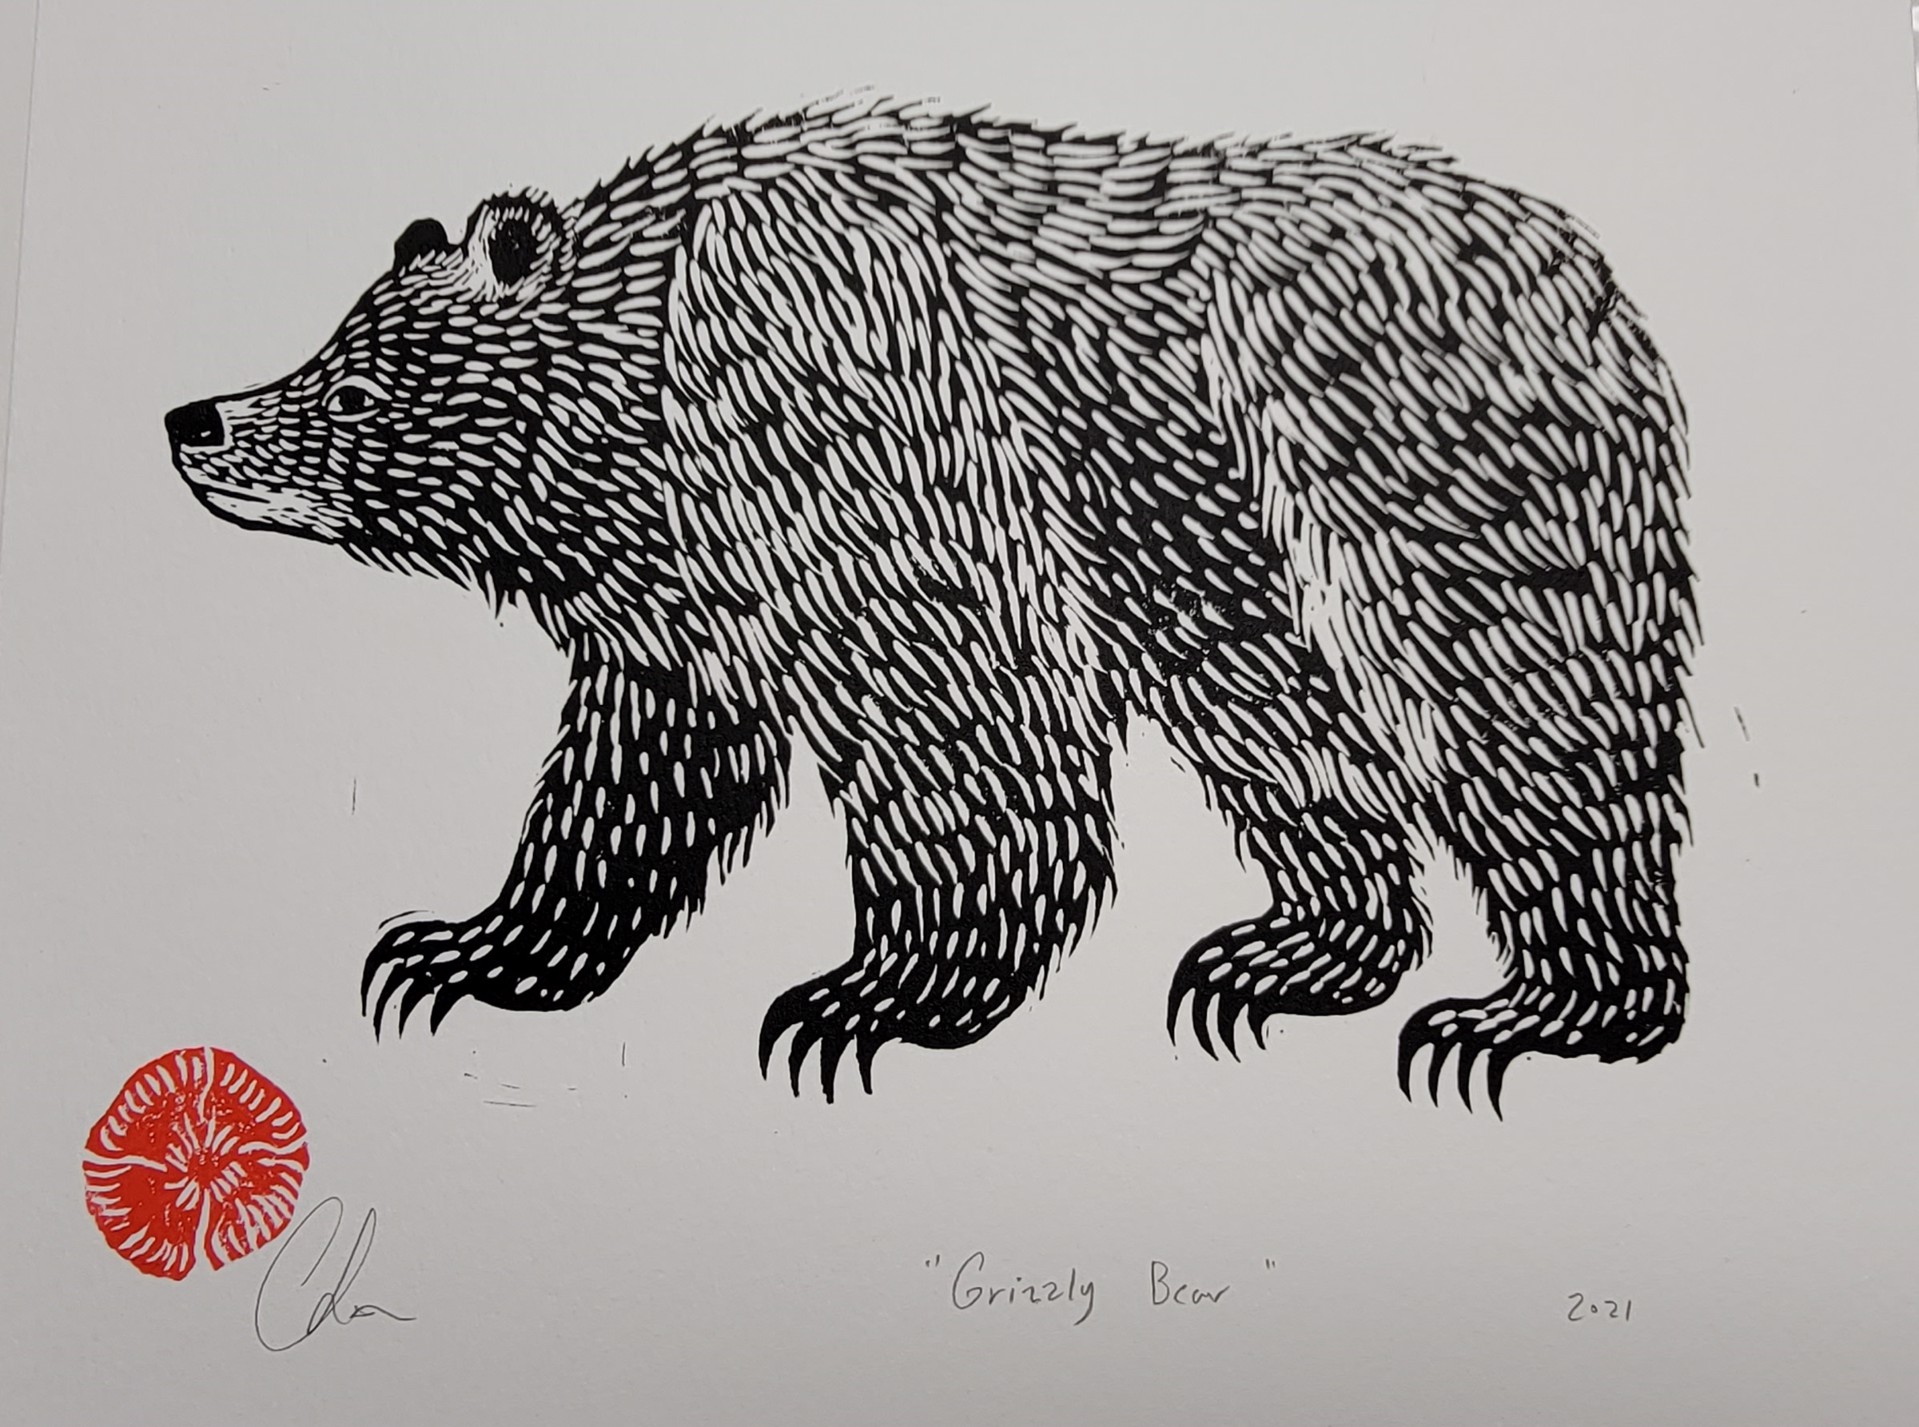 Grizzly Bear by Christine Sutton